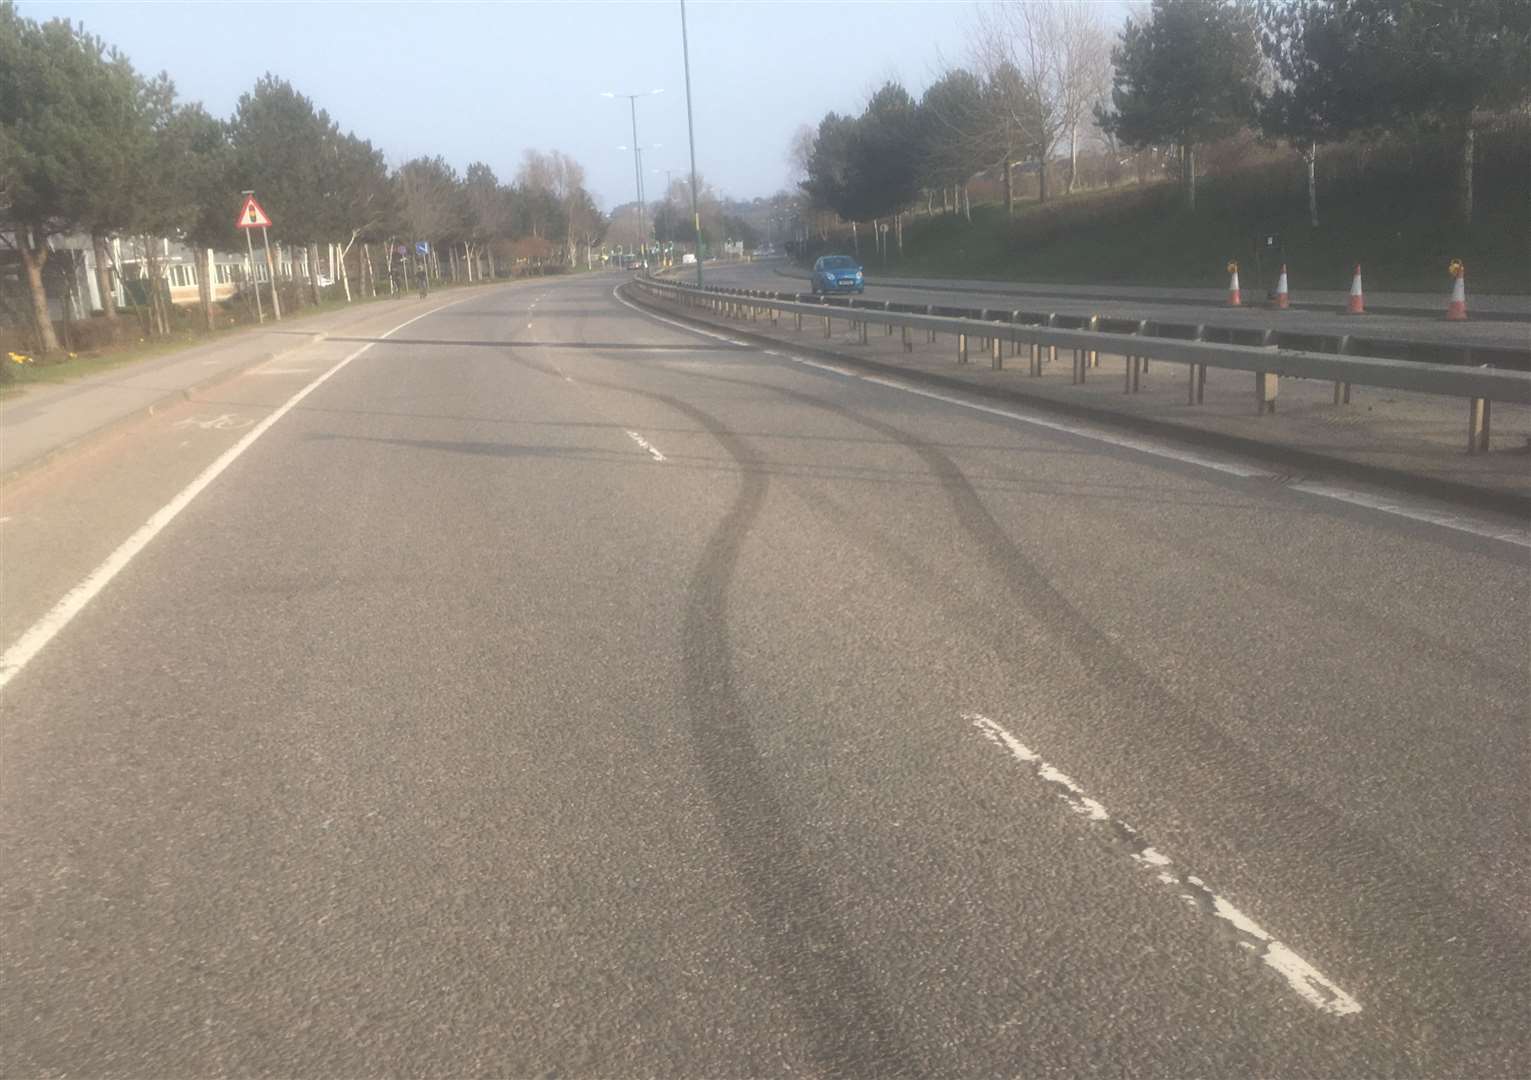 Tyre marks have been left on the Crossways Boulevard by reported nuisance motorists